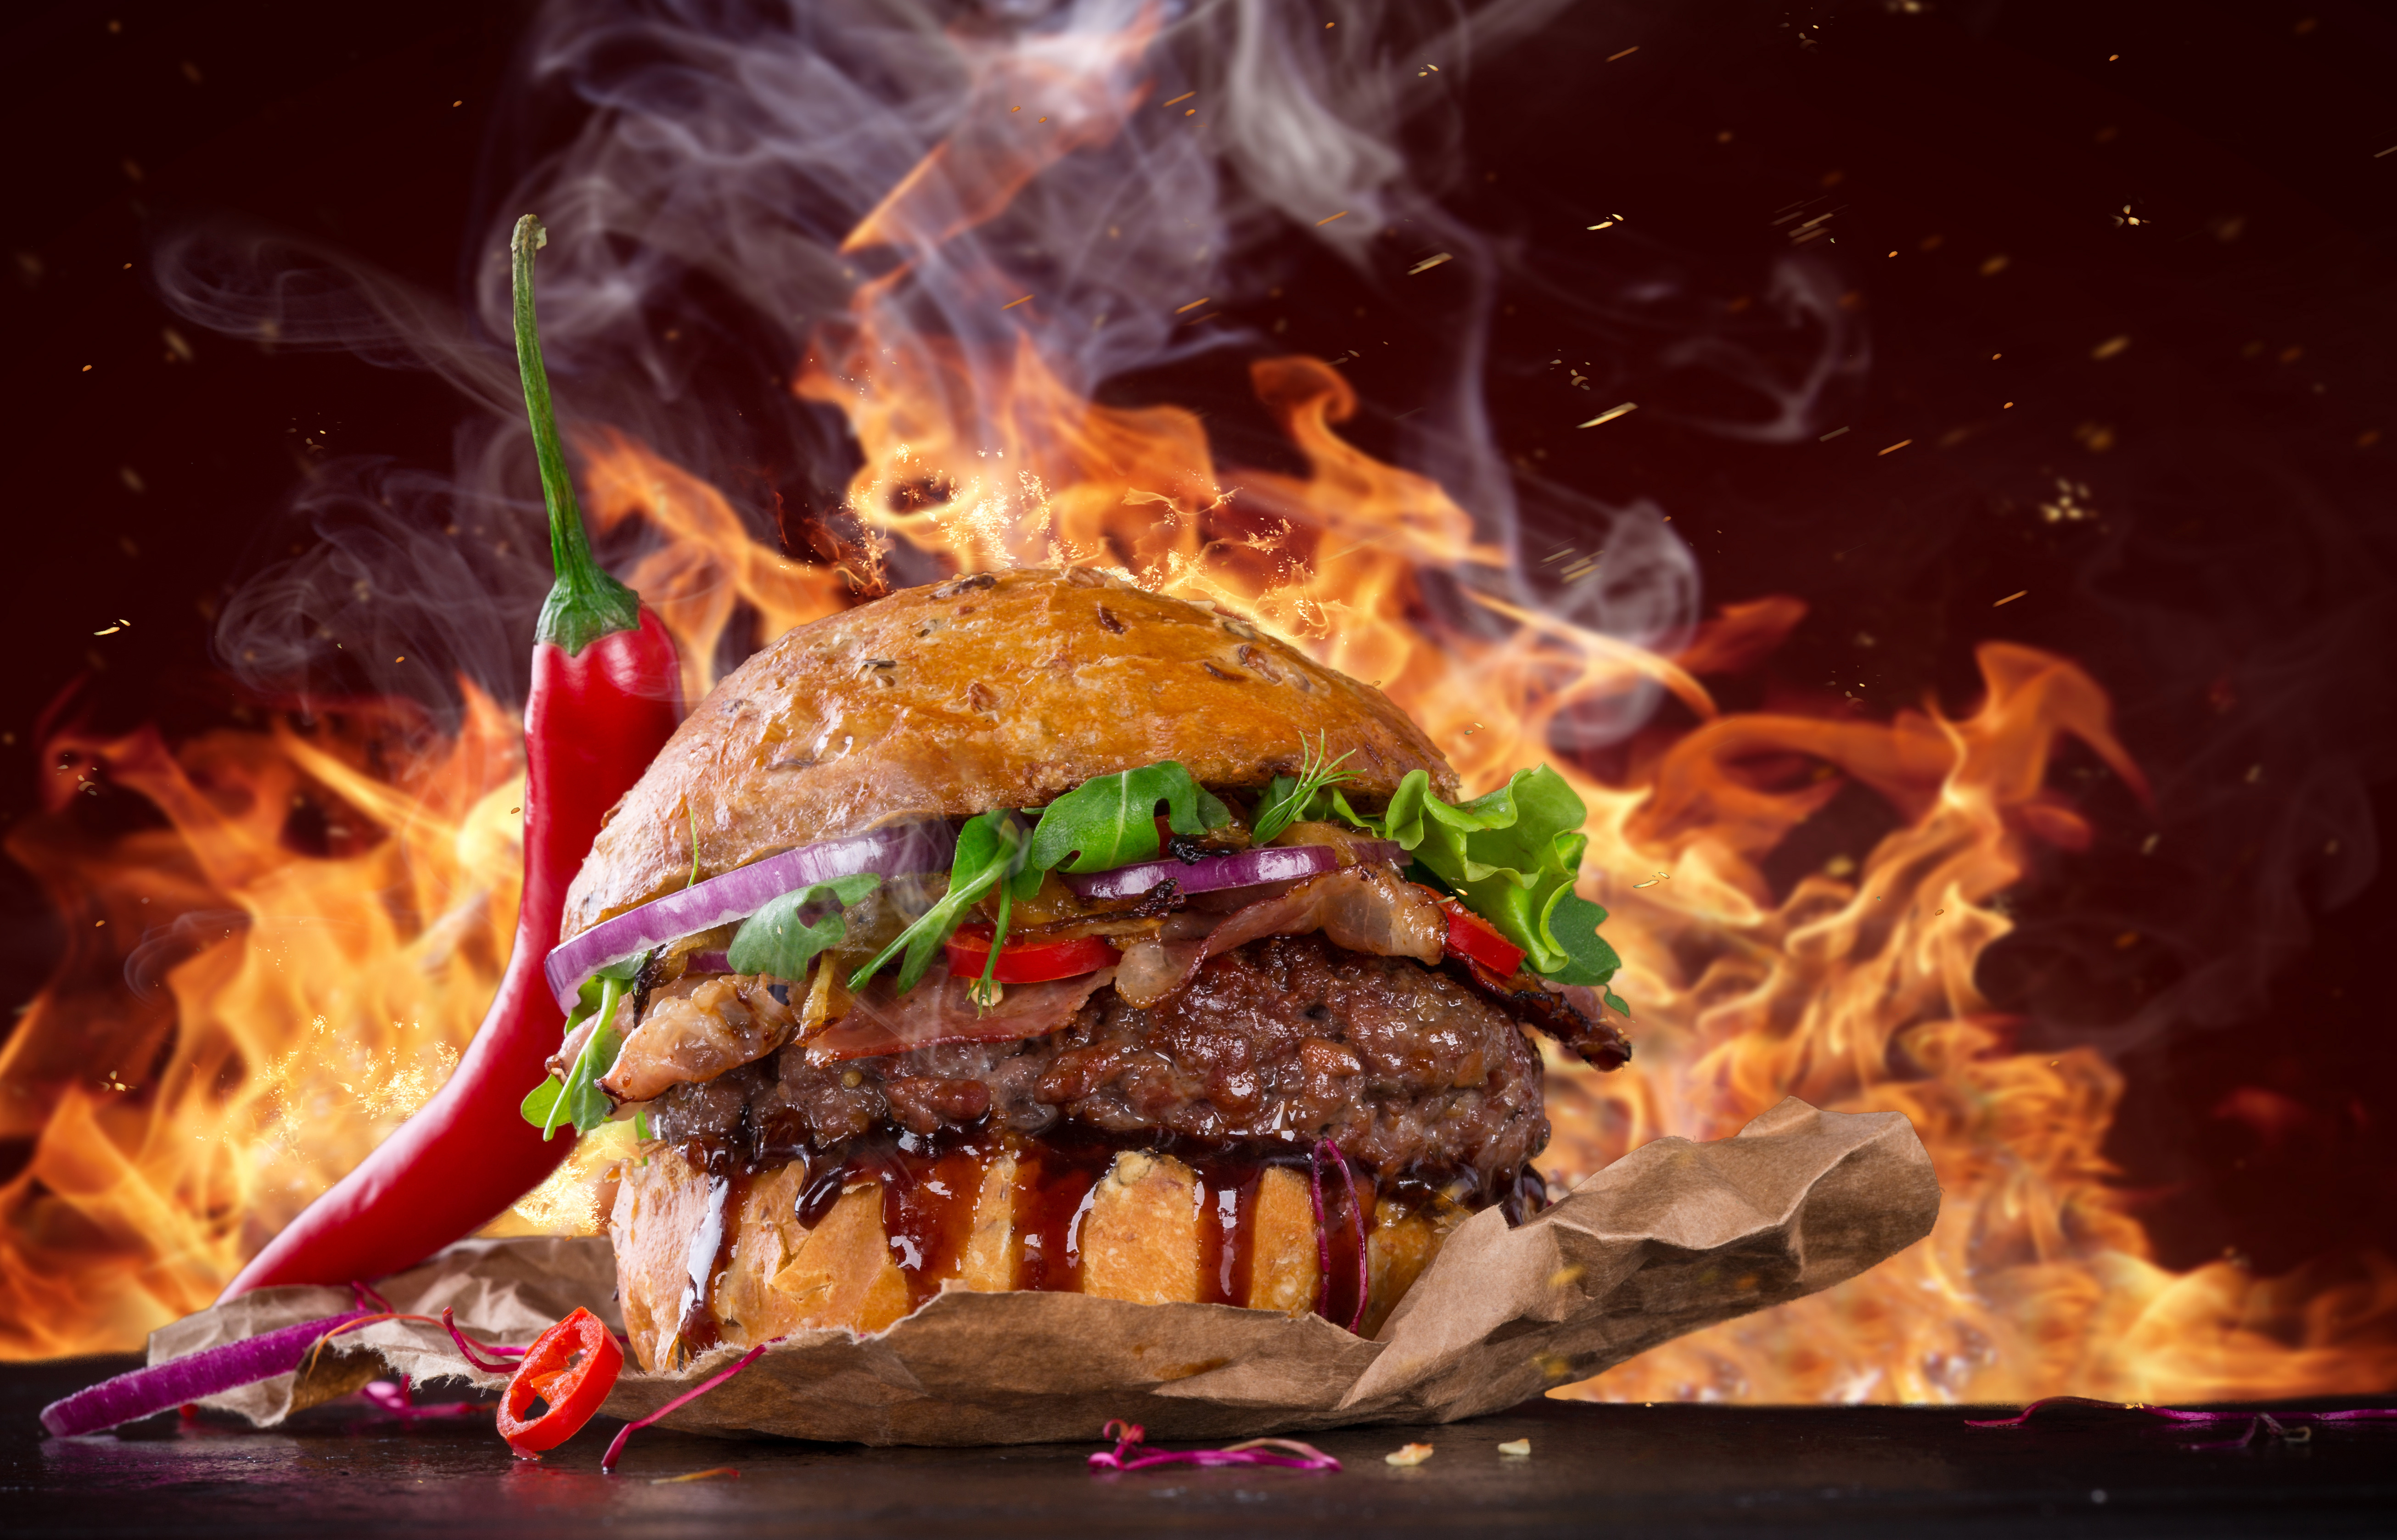 Hot Spicy Burger, HD Food, 4k Wallpapers, Images, Backgrounds, Photos ...